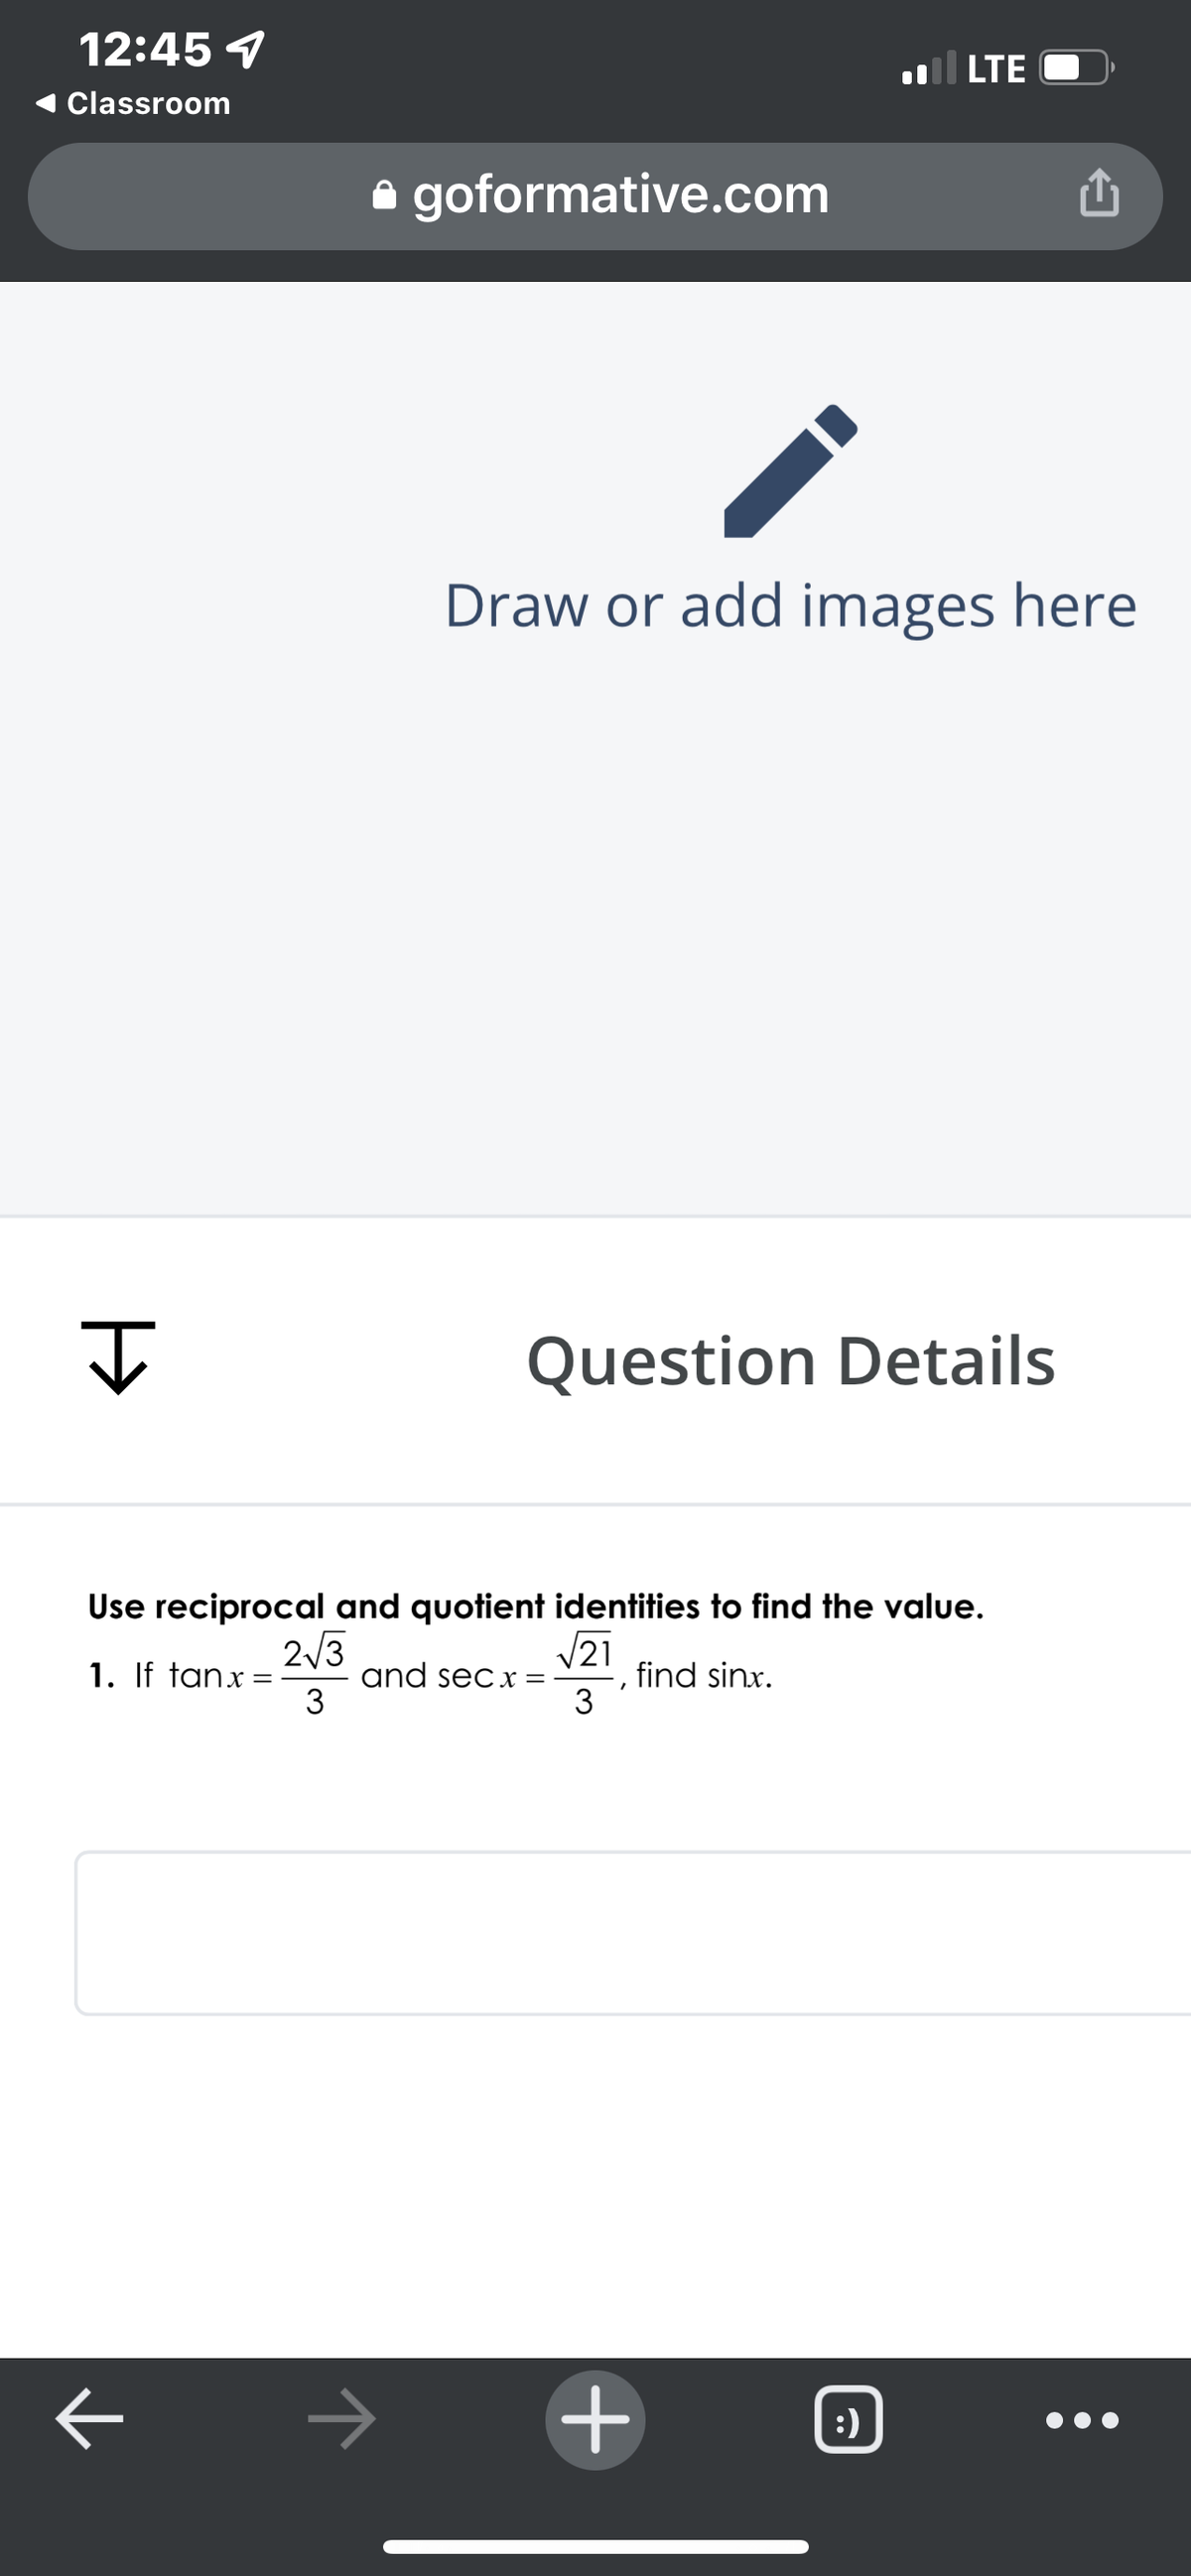 12:45 7
LTE
Classroom
e goformative.com
Draw or add images here
Question Details
Use reciprocal and quotient identities to find the value.
V21
2/3
1. If tanx =
3
and secx=
find sinx.
3
:)
